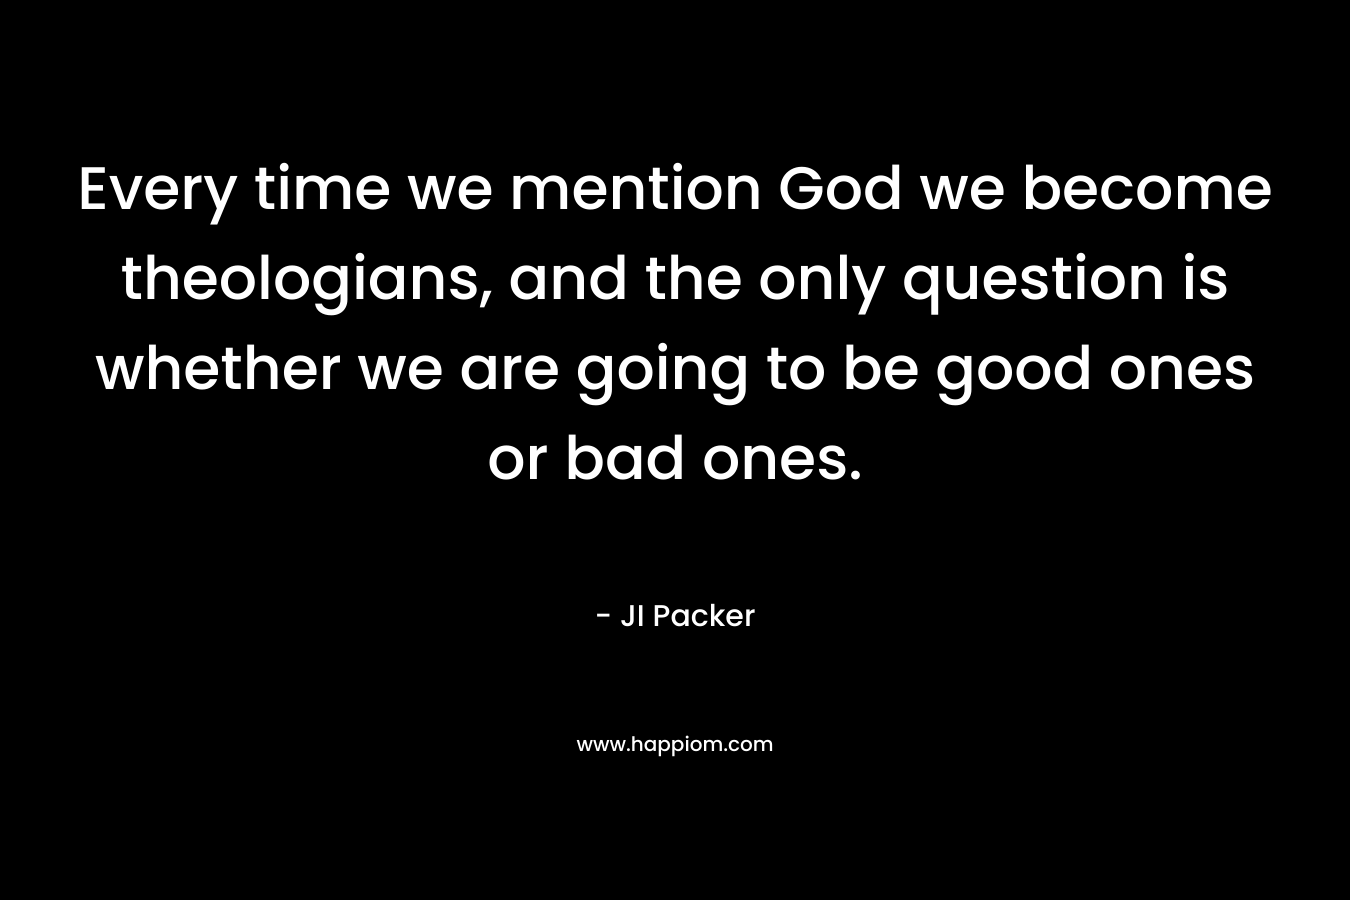 Every time we mention God we become theologians, and the only question is whether we are going to be good ones or bad ones. – JI Packer